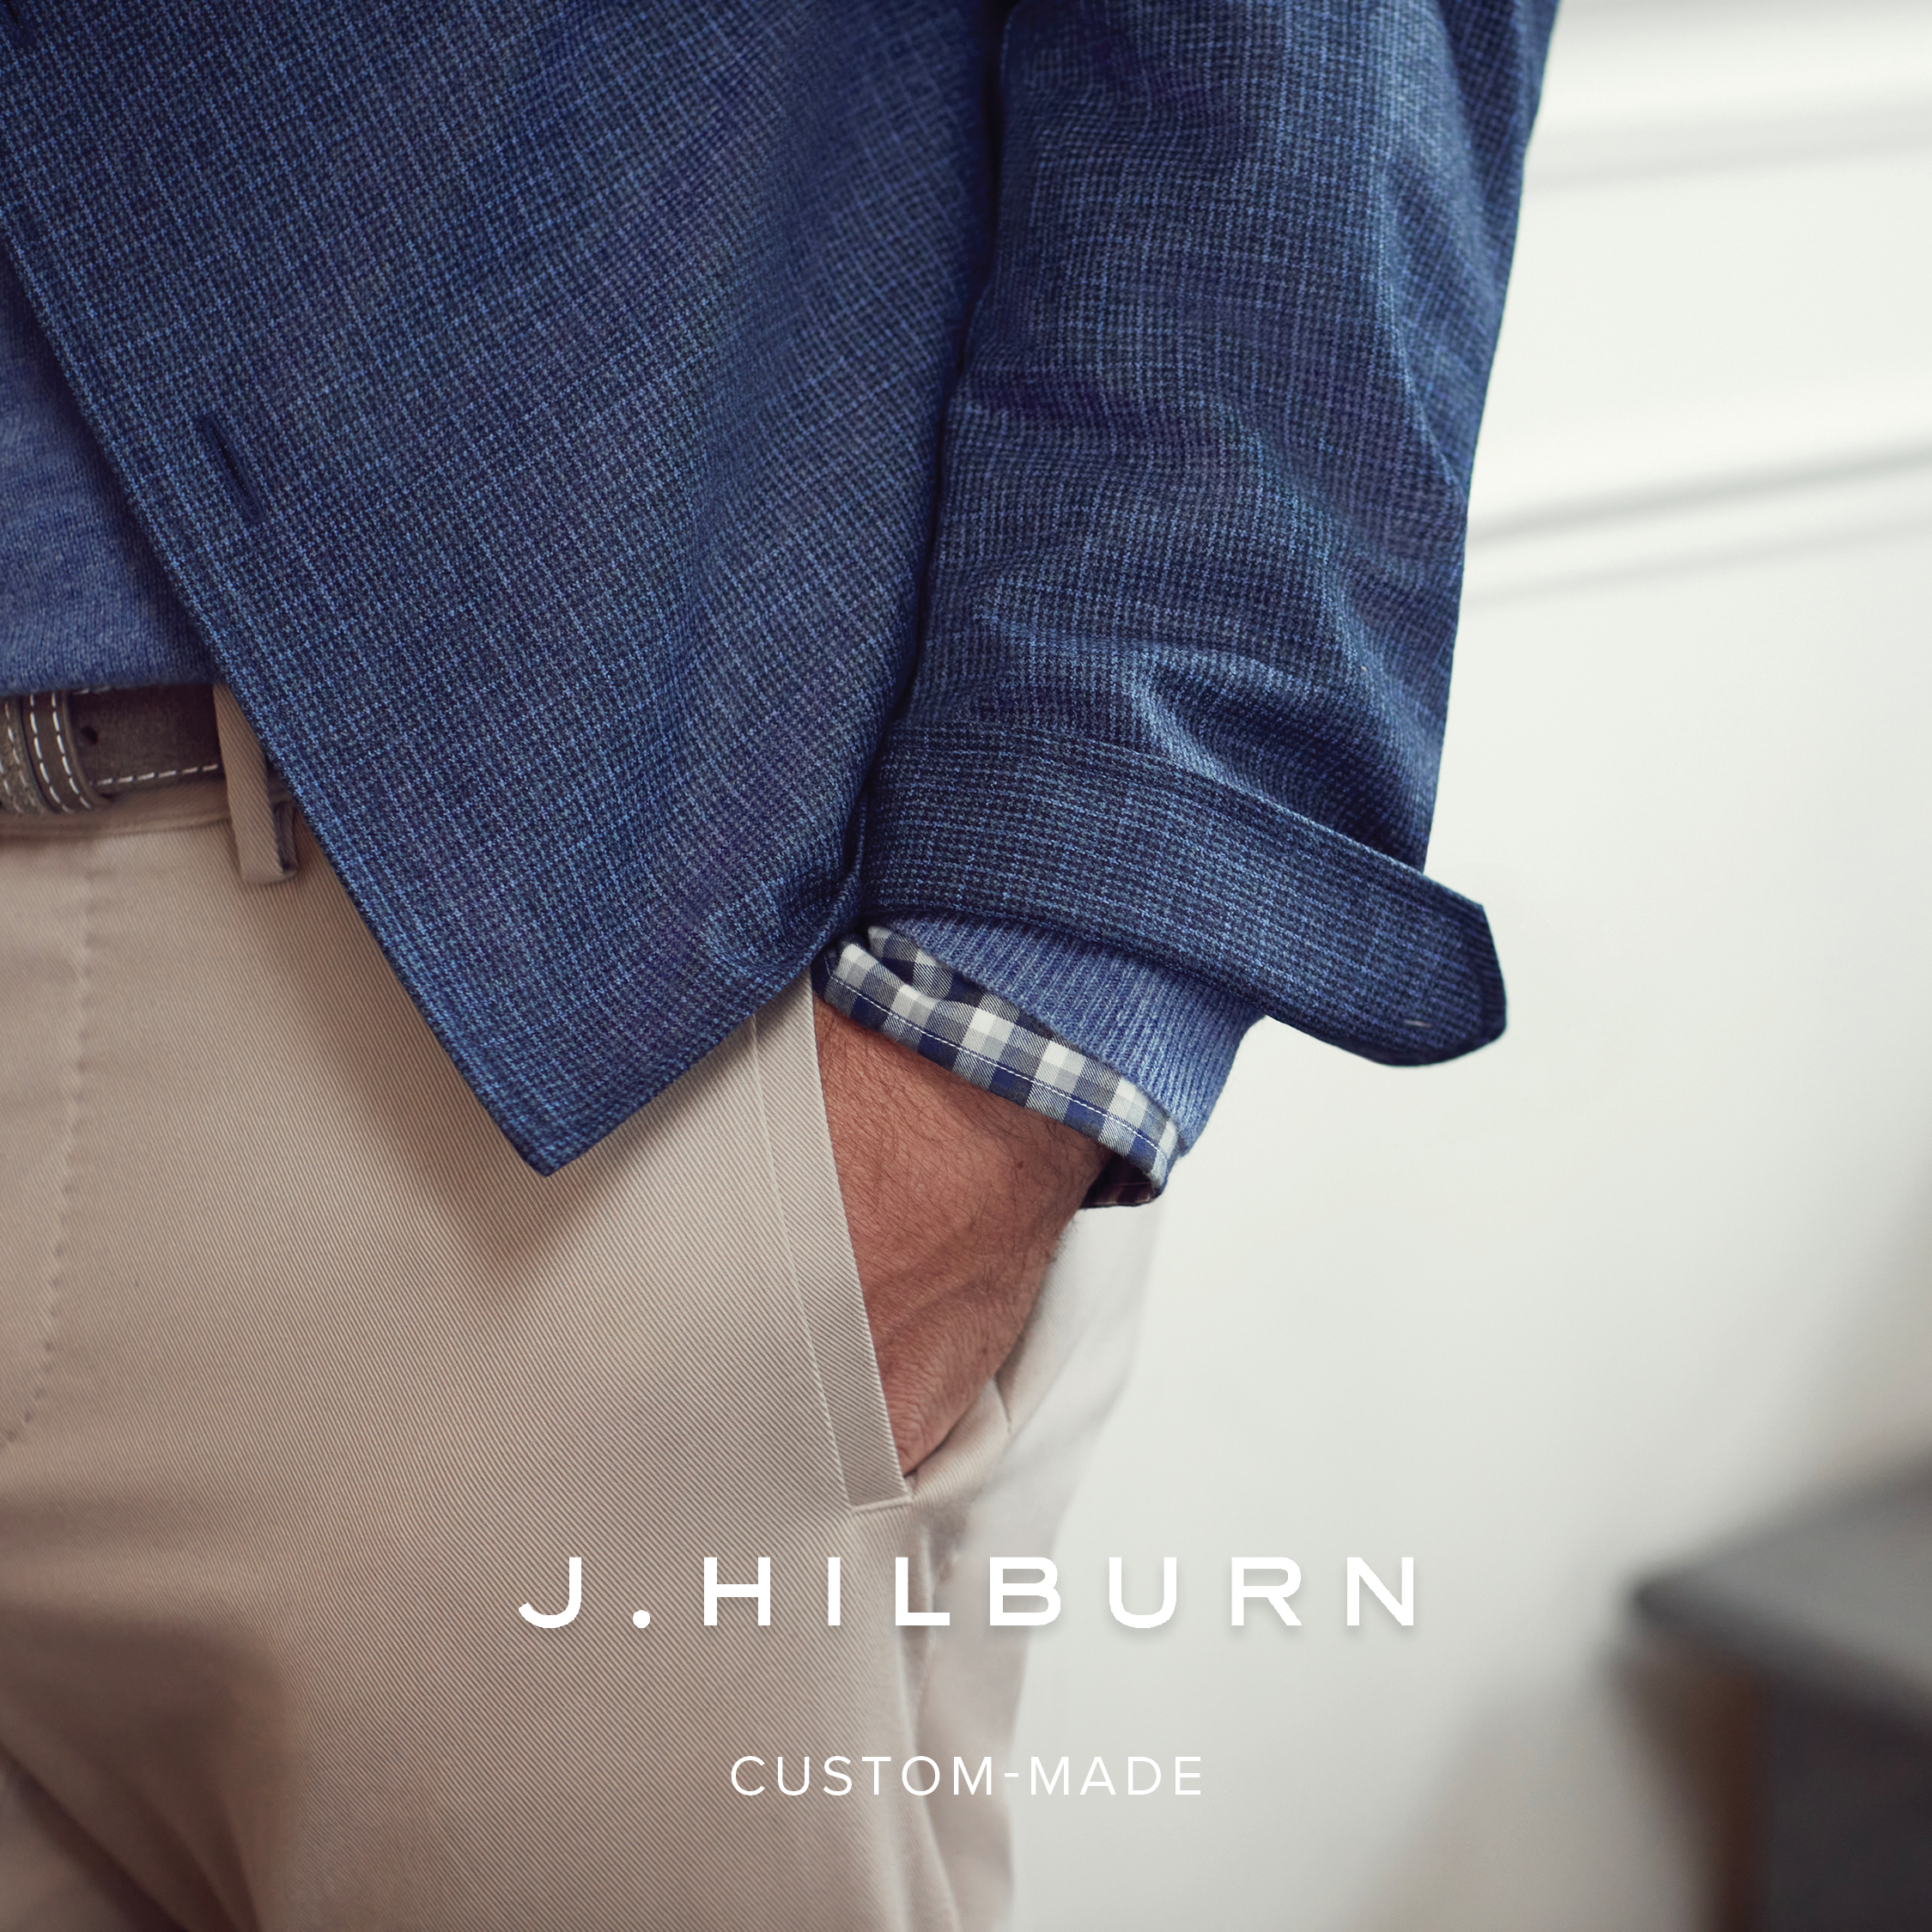 Check out J.Hilburn outerwear collection. From trendy shirt jackets to traditional Peacoats in cashmere and outerwear down puffer vest. J.Hilburn is where to shop for mens custom outerwear.